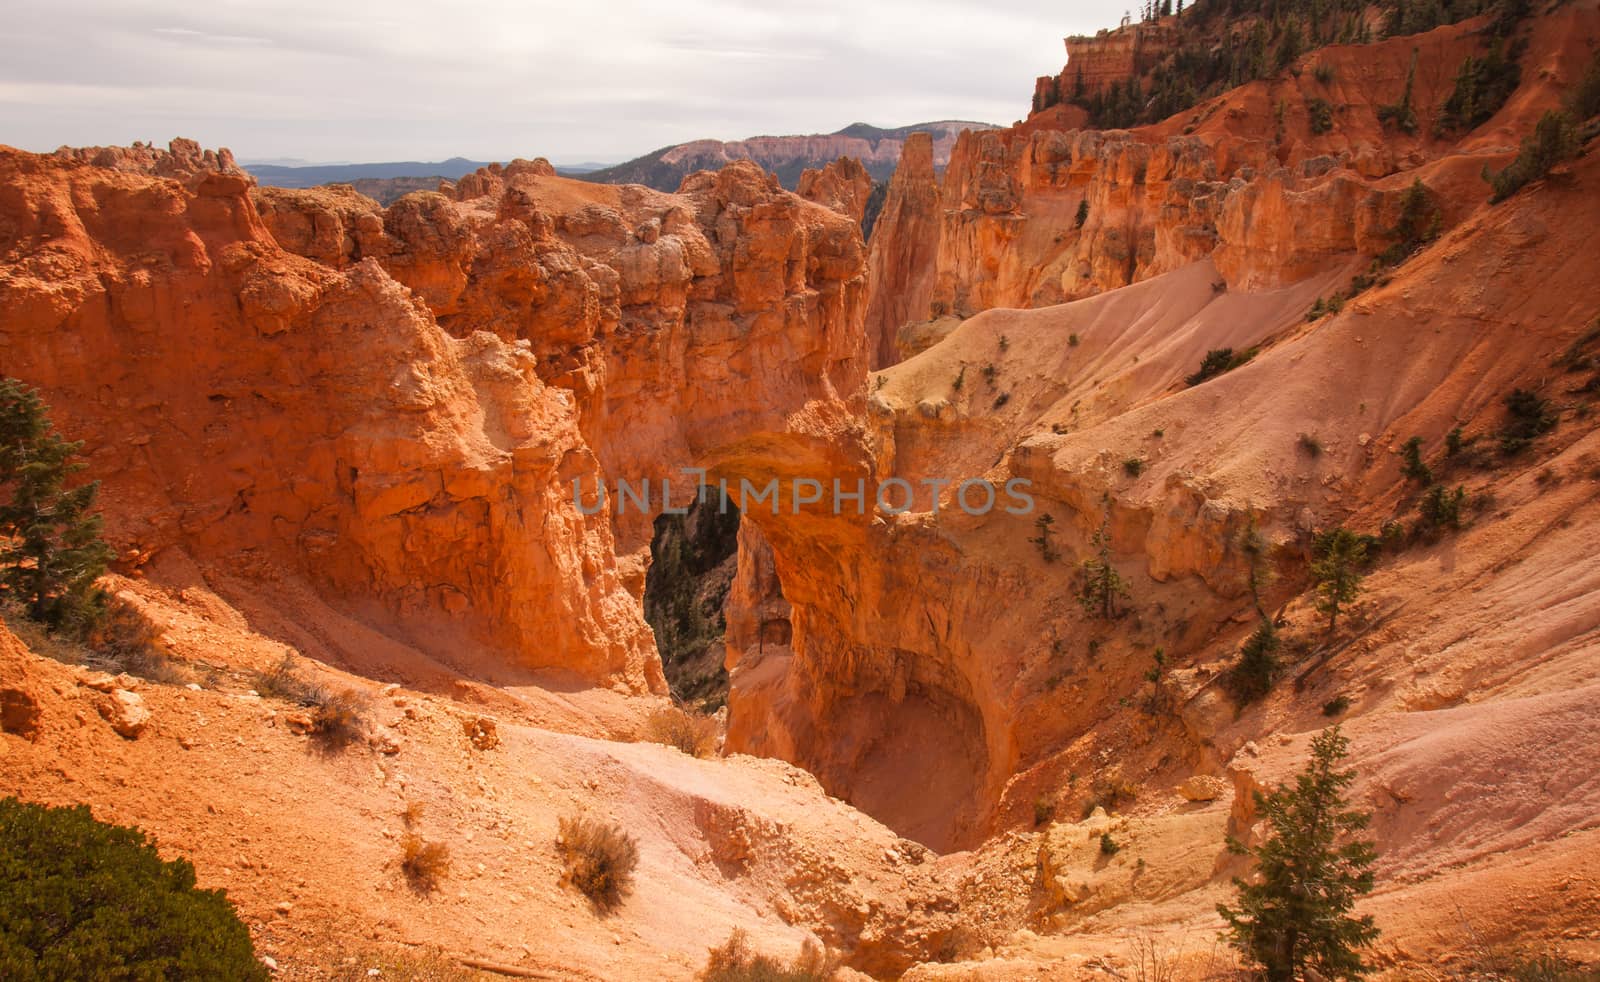 The Natural Bridge, photographed at Fair-view Point in Bryce Canyon National Park.Utah.